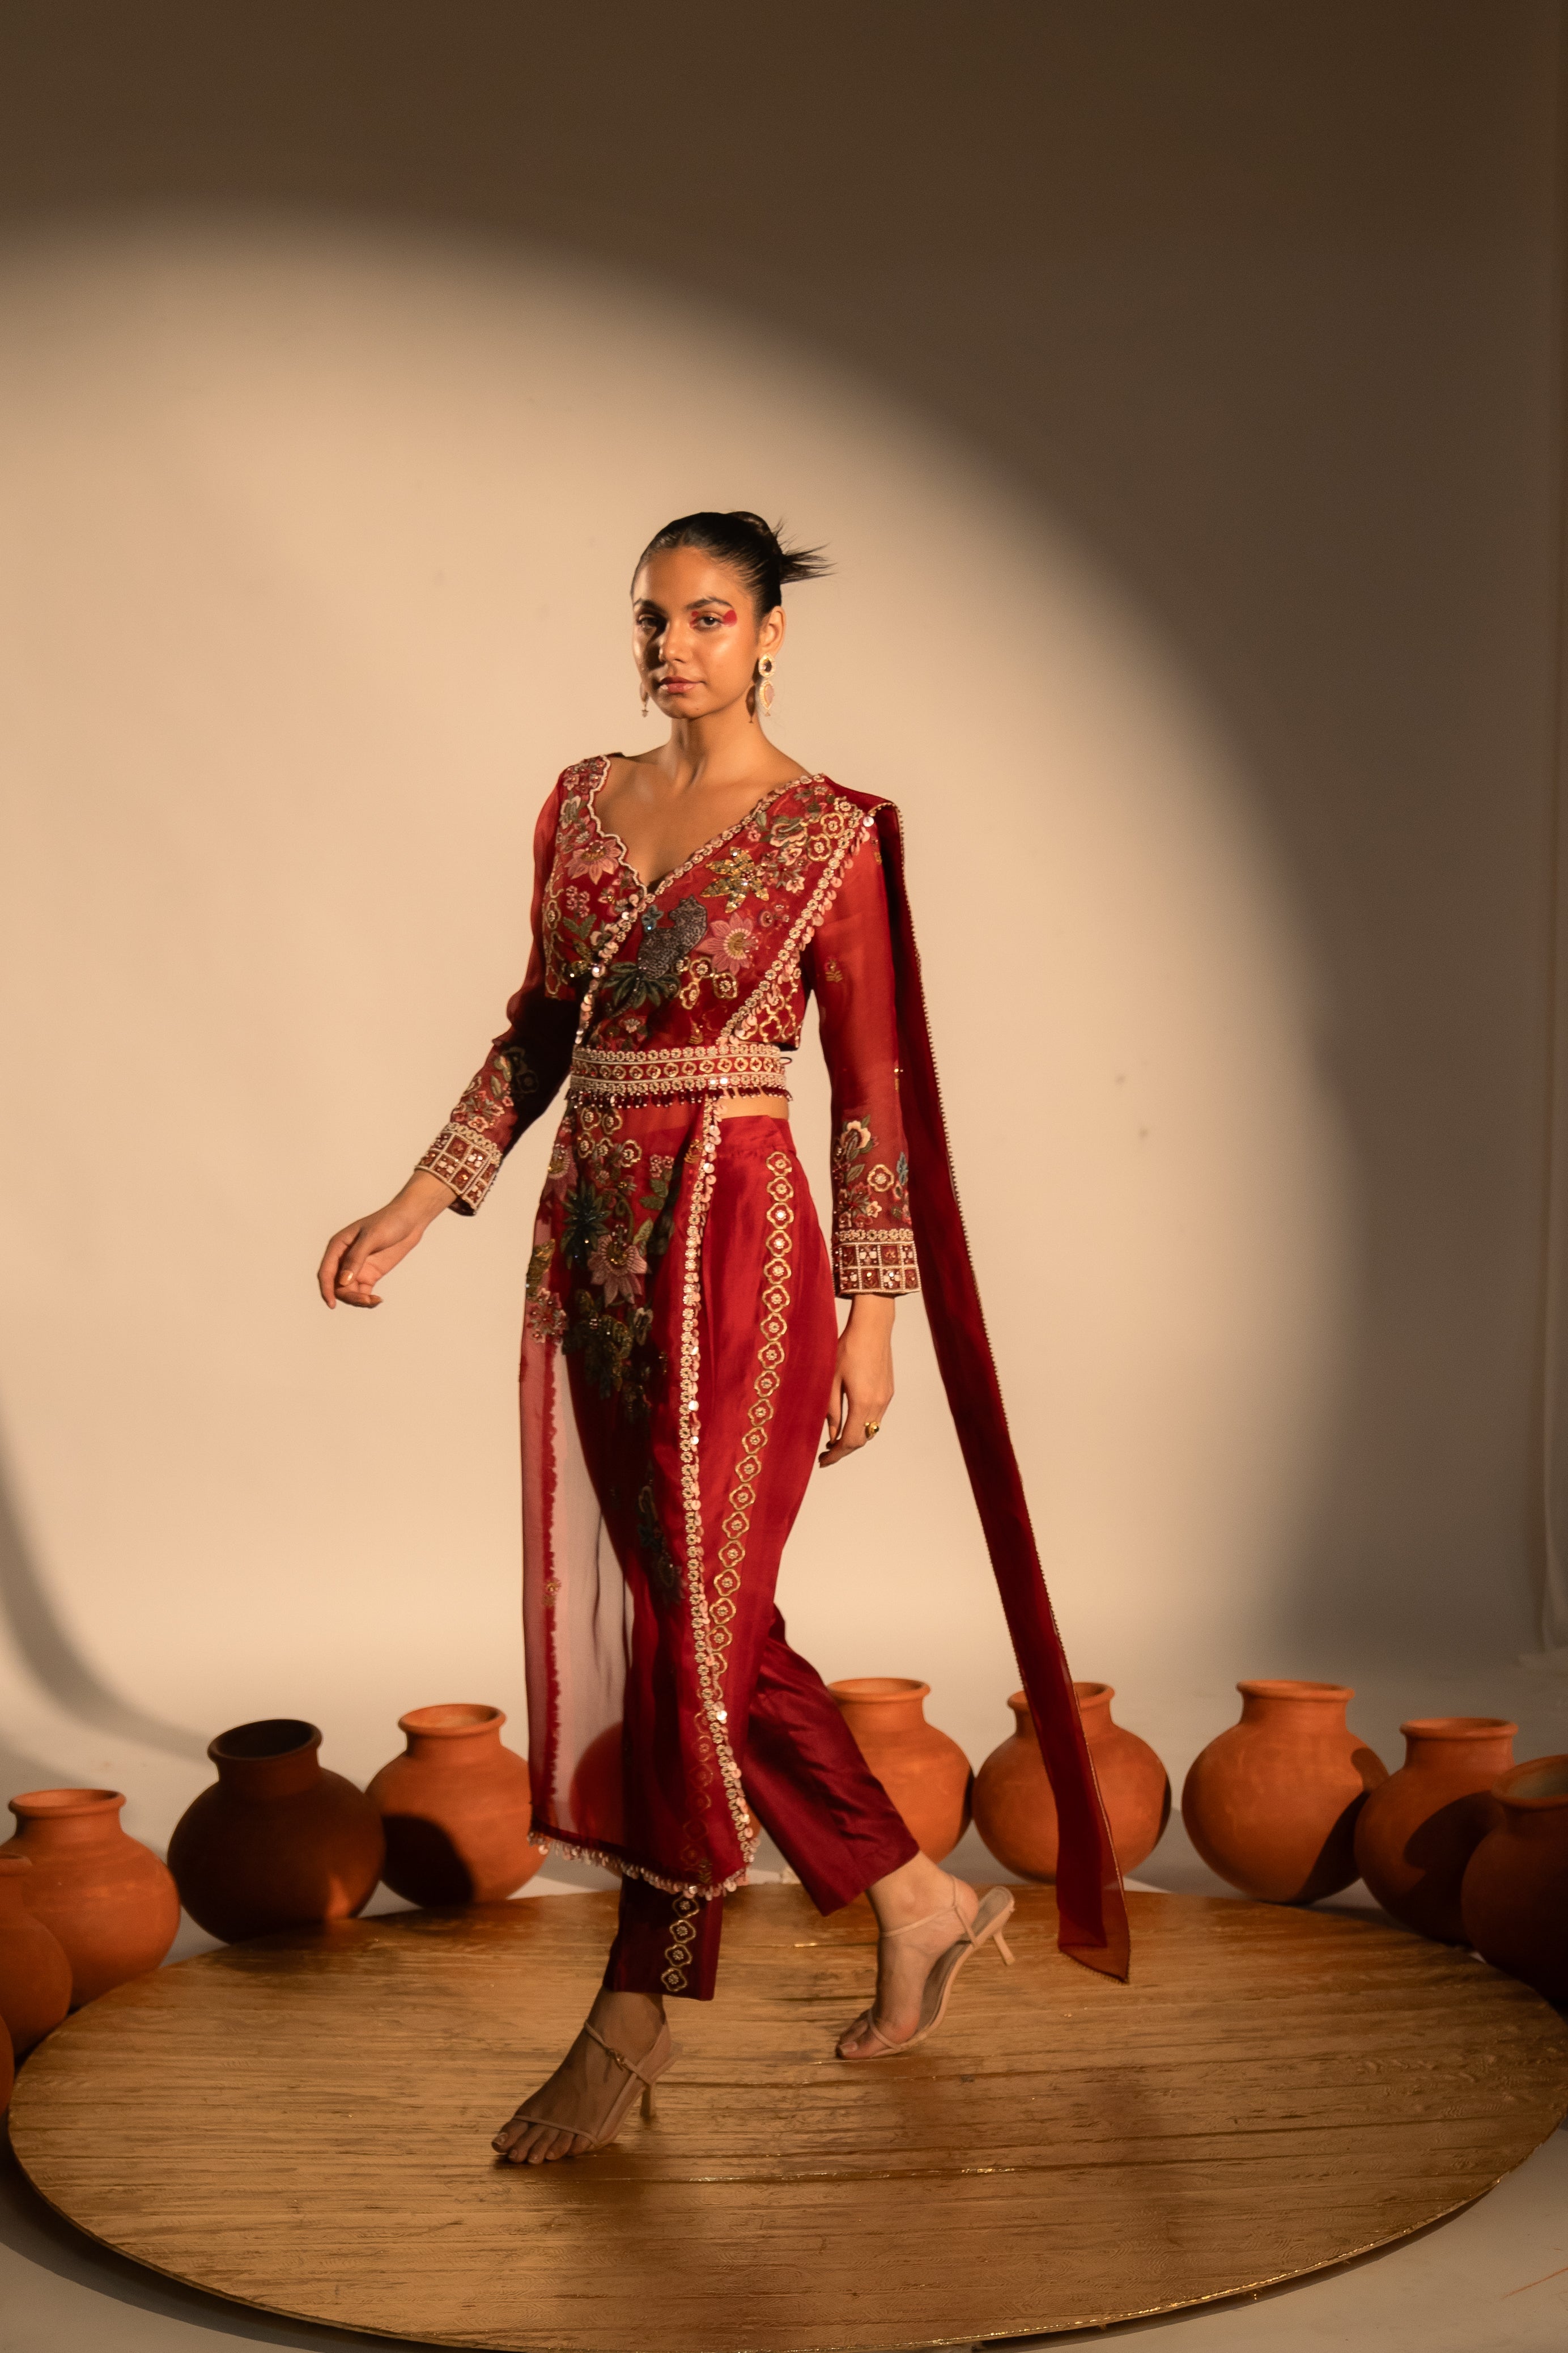 CHHAVVI AGGARWAL presents Raas Light Peach Pant Saree Set With Belt  exclusively at FEI